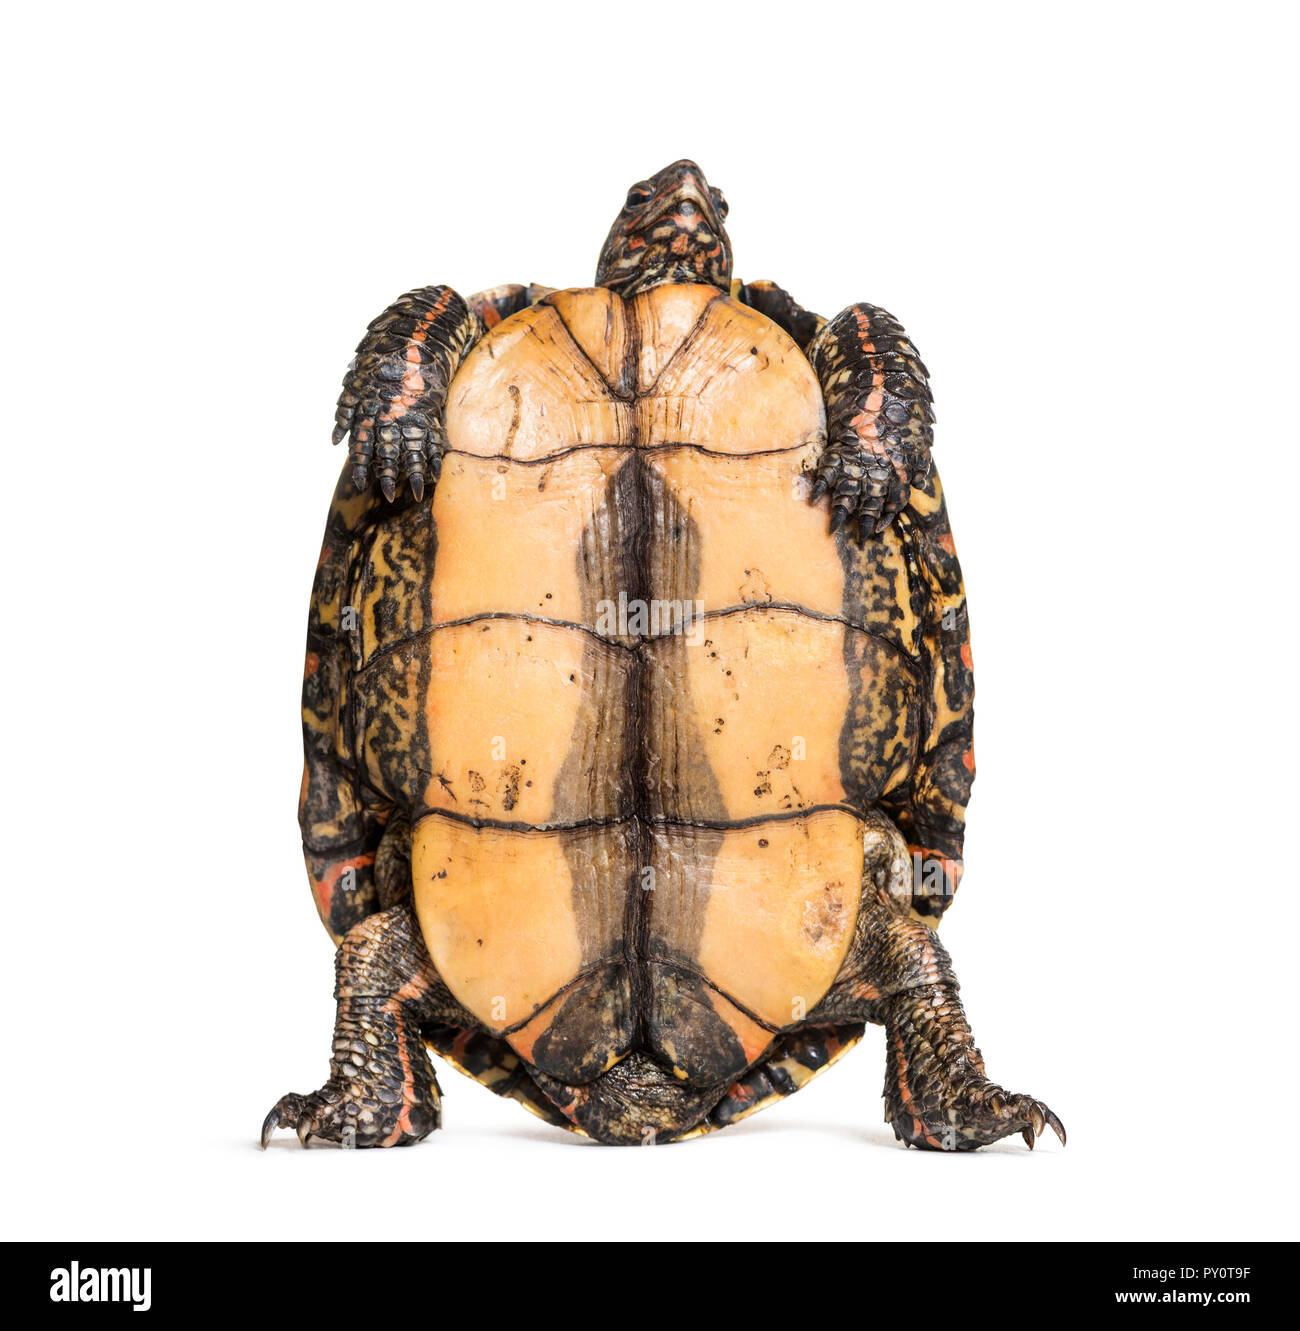 Plastron of the ornate or painted wood turtle, Rhinoclemmys pulcherrima, in front of white background Stock Photo